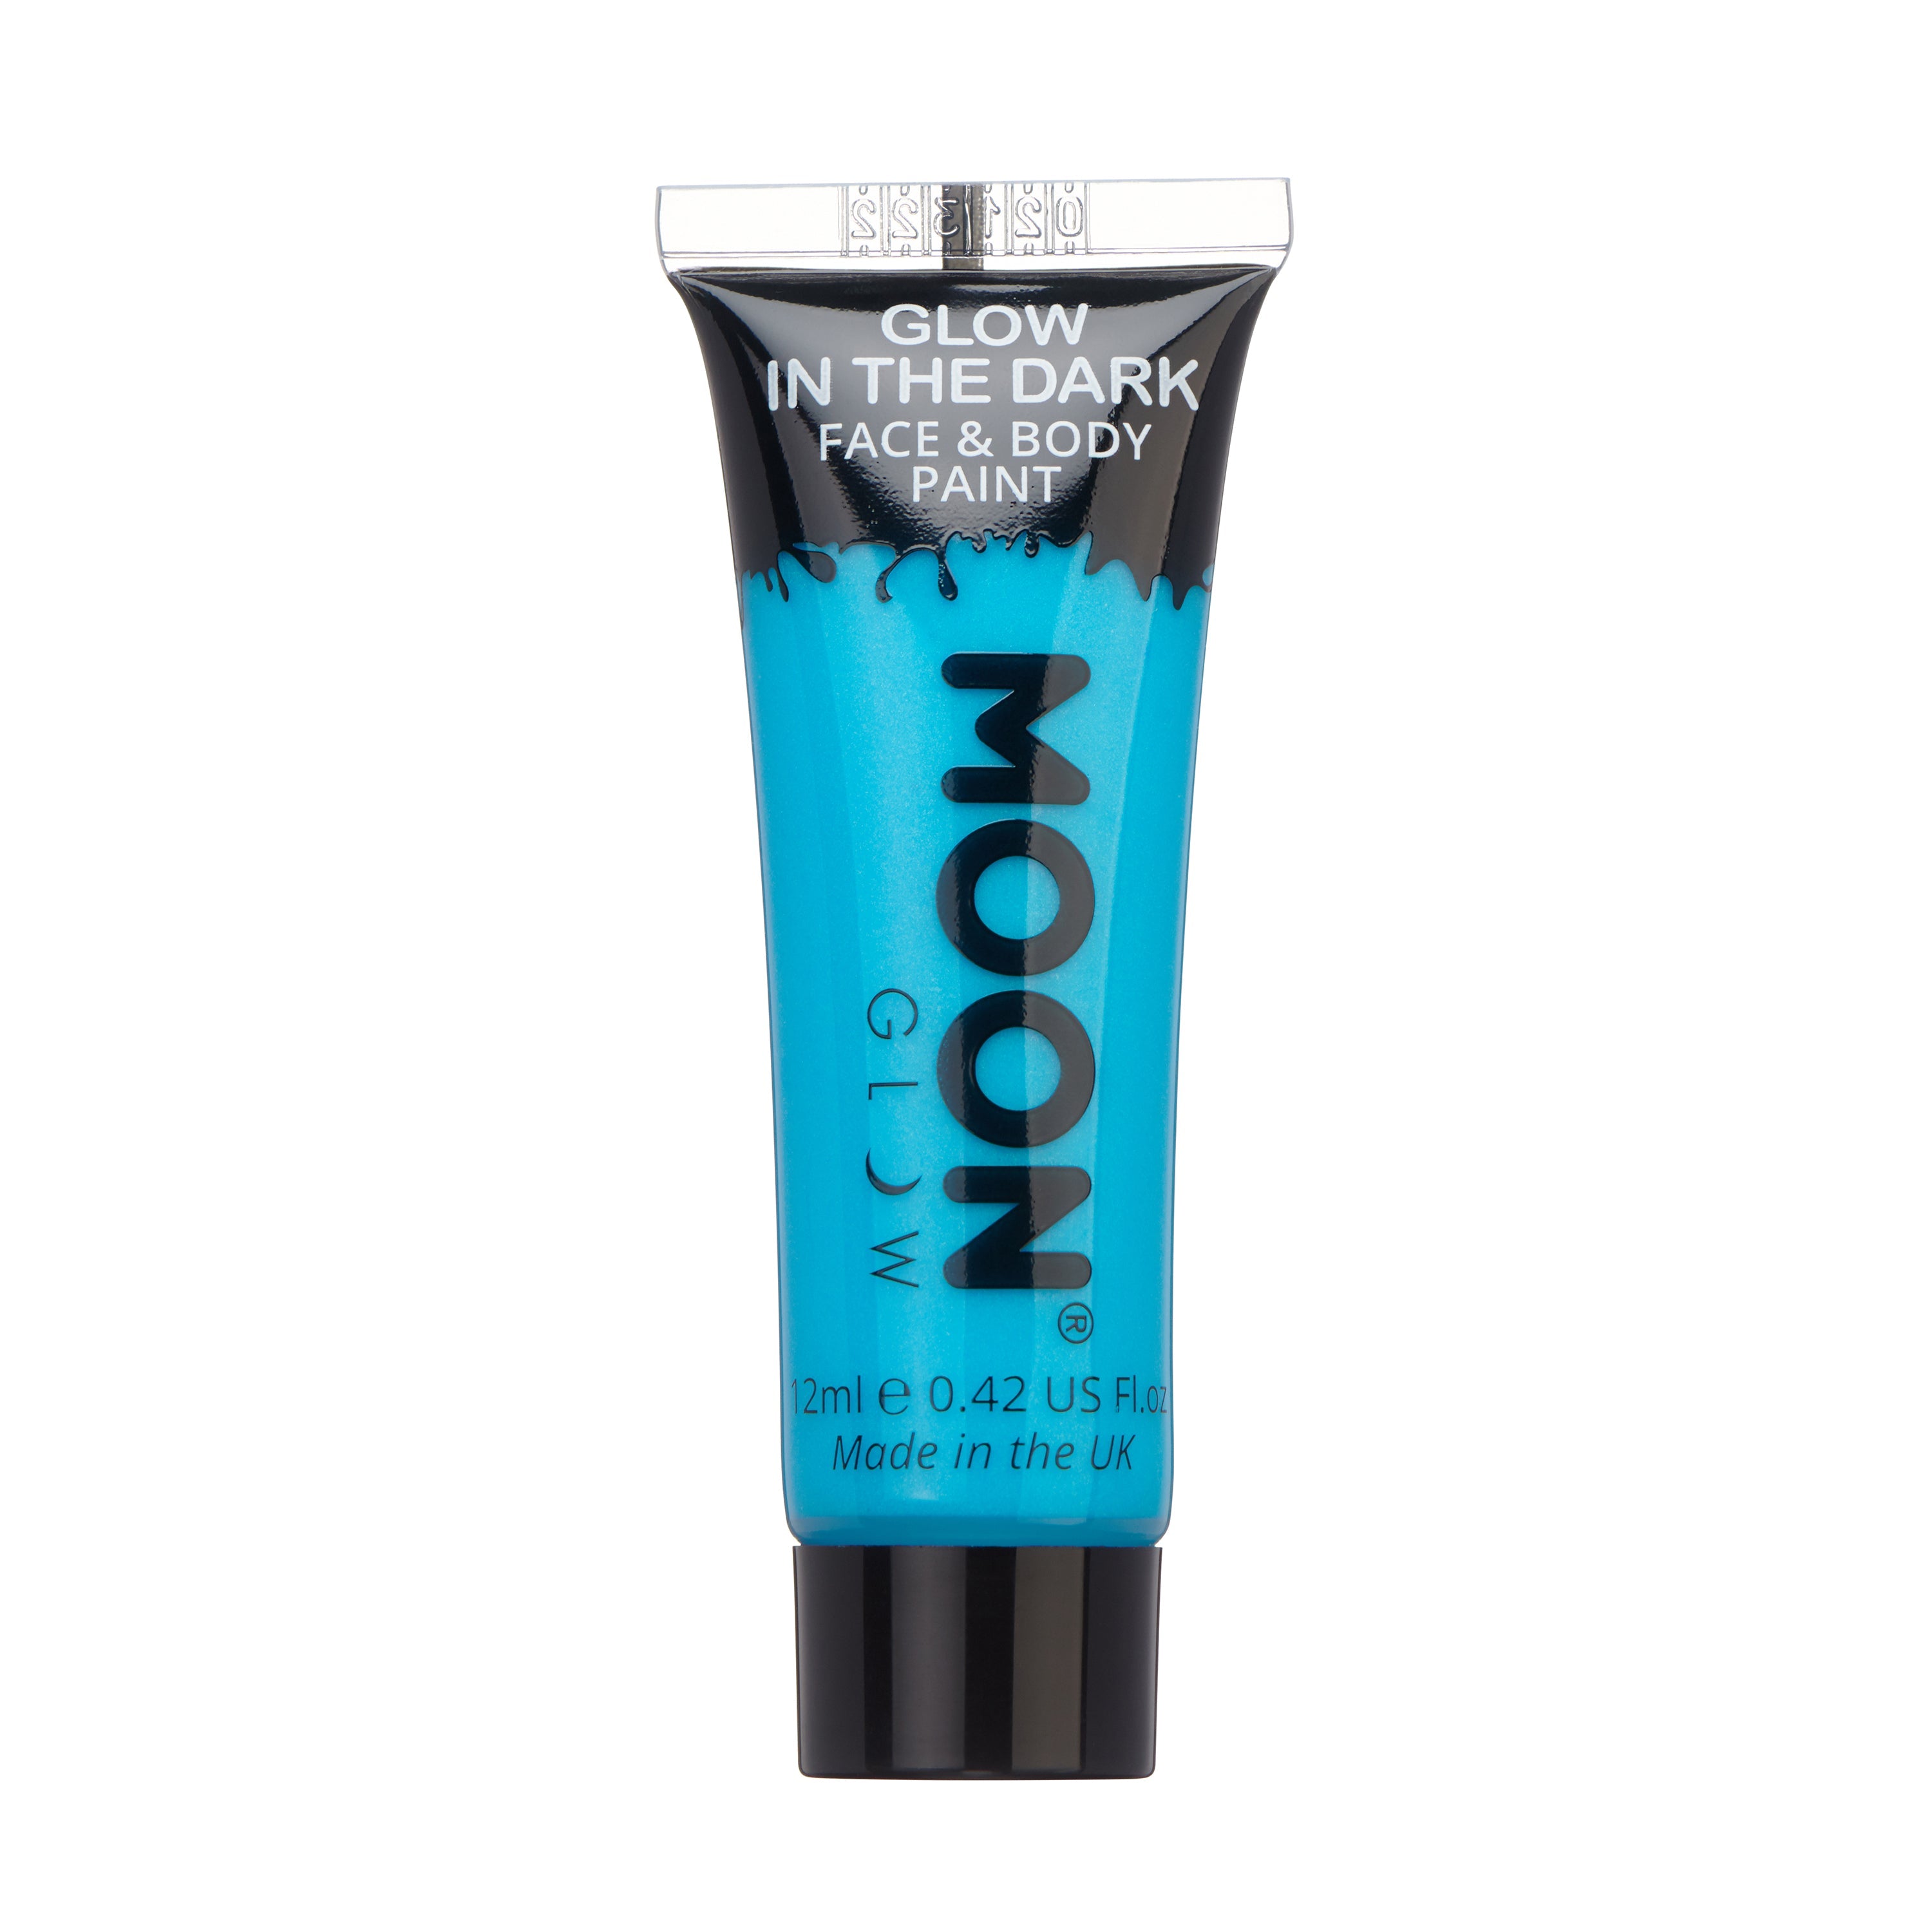 Blue - Glow Face & Body Paint Makeup, 12mL. Cosmetically certified, FDA & Health Canada compliant, cruelty free and vegan.